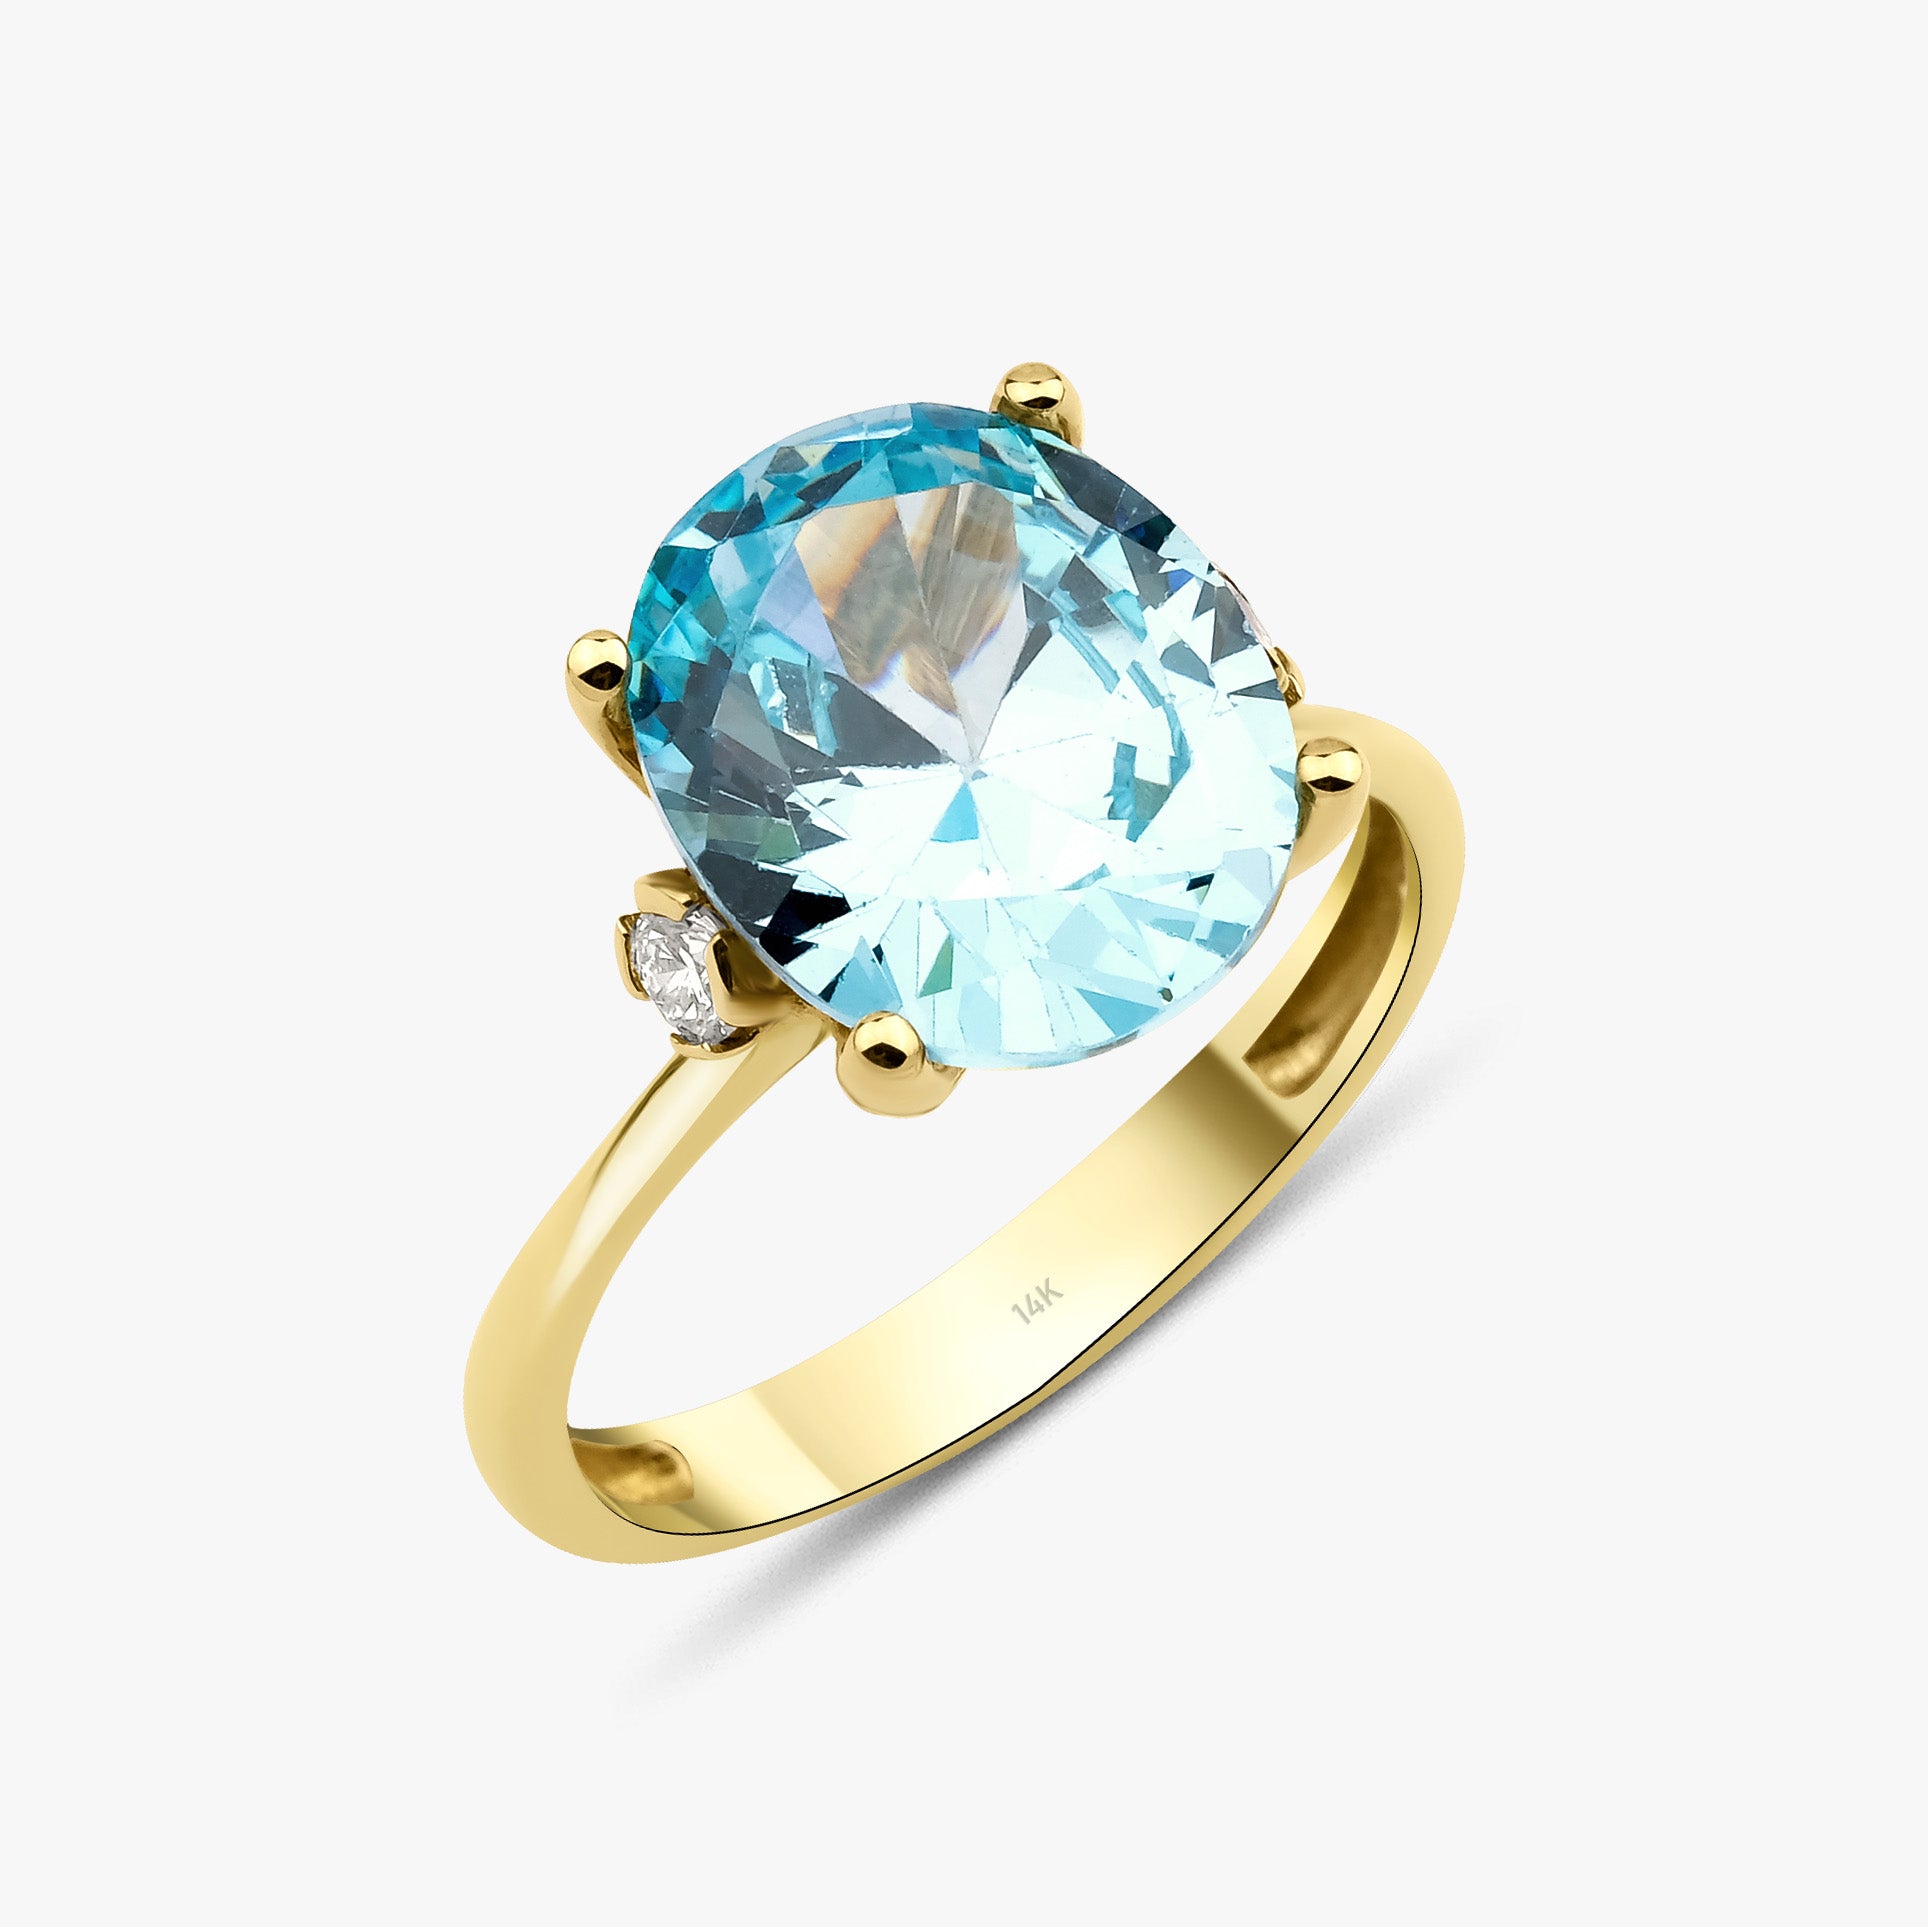 Oval Cut Blue Zirconia and Diamond Cocktail Ring in 14K Gold